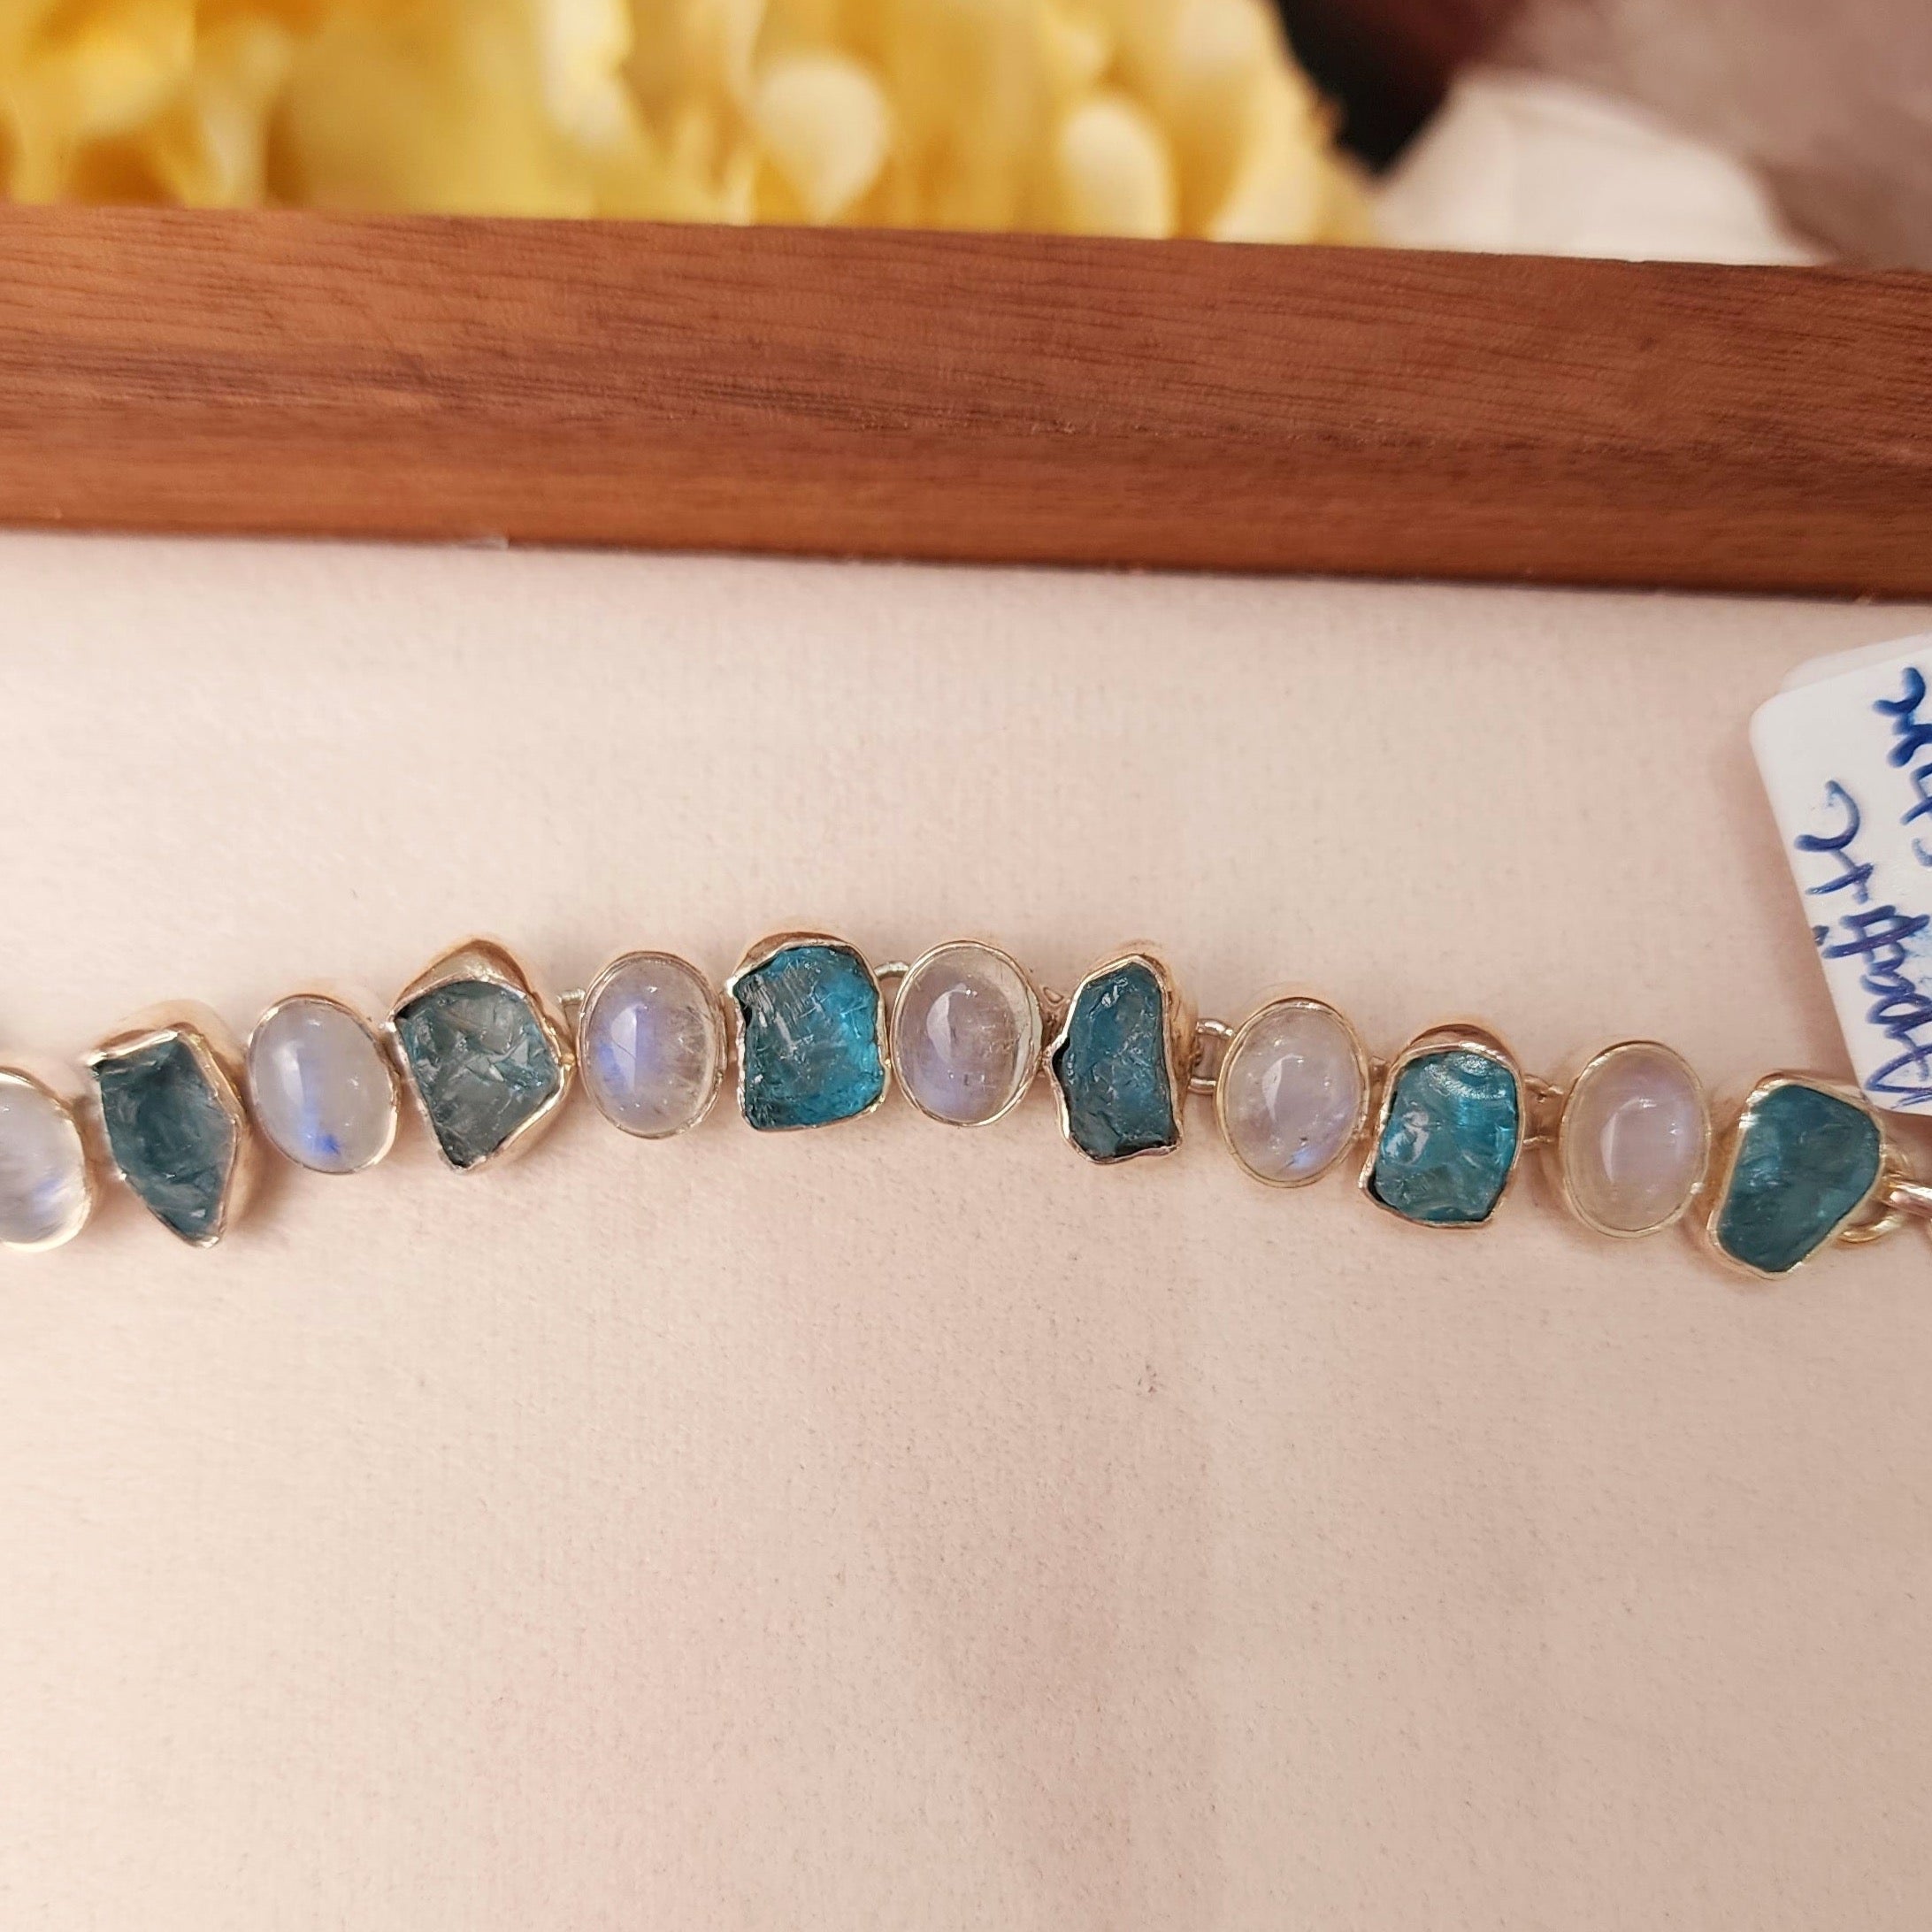 Paraíba Blue Apatite with Rainbow Moonstone Bracelet .925 Silver for Starting Fresh and Healthy Choices